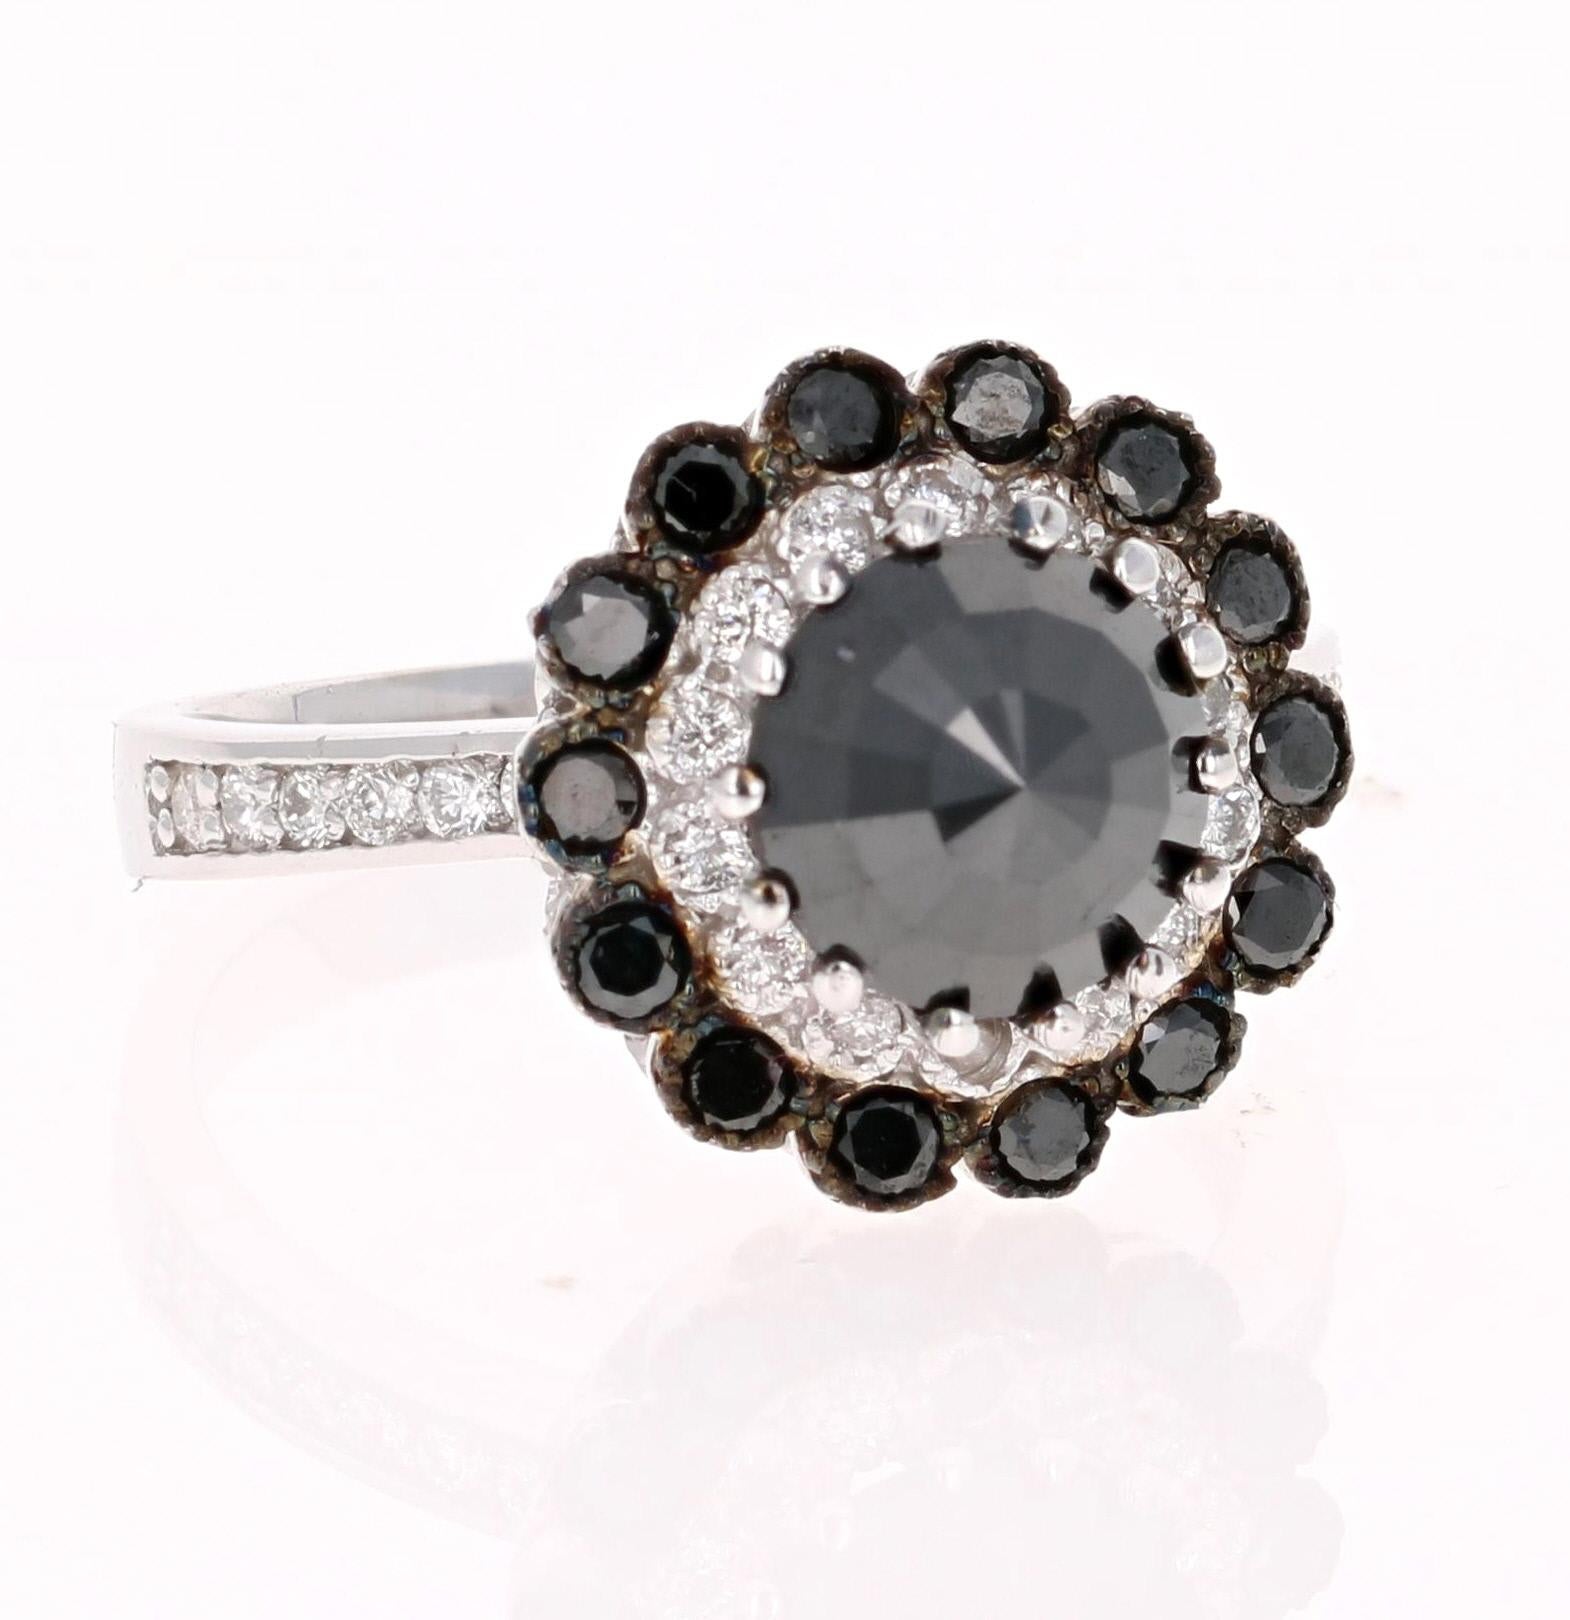 2.79 Carat Pear Cut Black Diamond White Gold Bridal Ring!
Gorgeous Black Diamond Ring that can transform into an Engagement ring.  

There is a 1.73 carat Round Cut Black Diamond in the center which is surrounded by both Black and White Round Cut